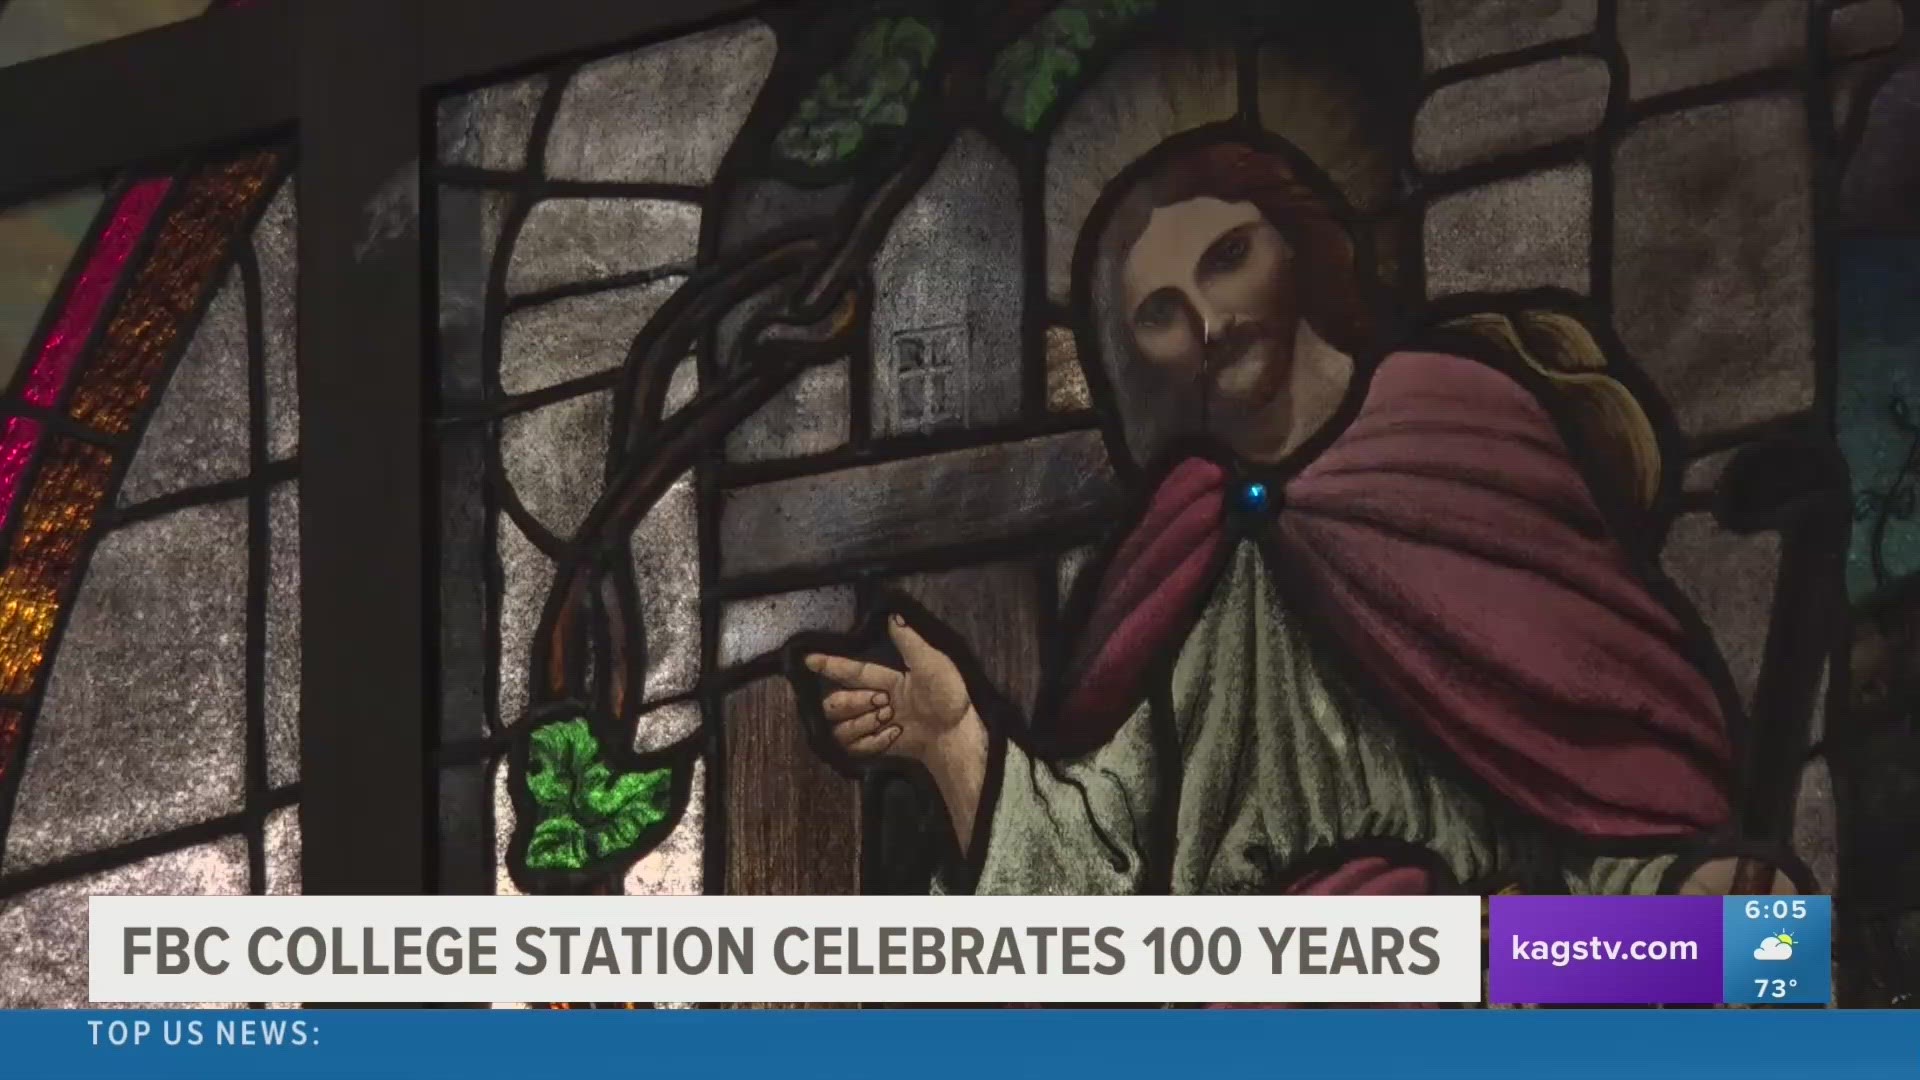 The church celebrated their 100-year anniversary at their Easter service in April.